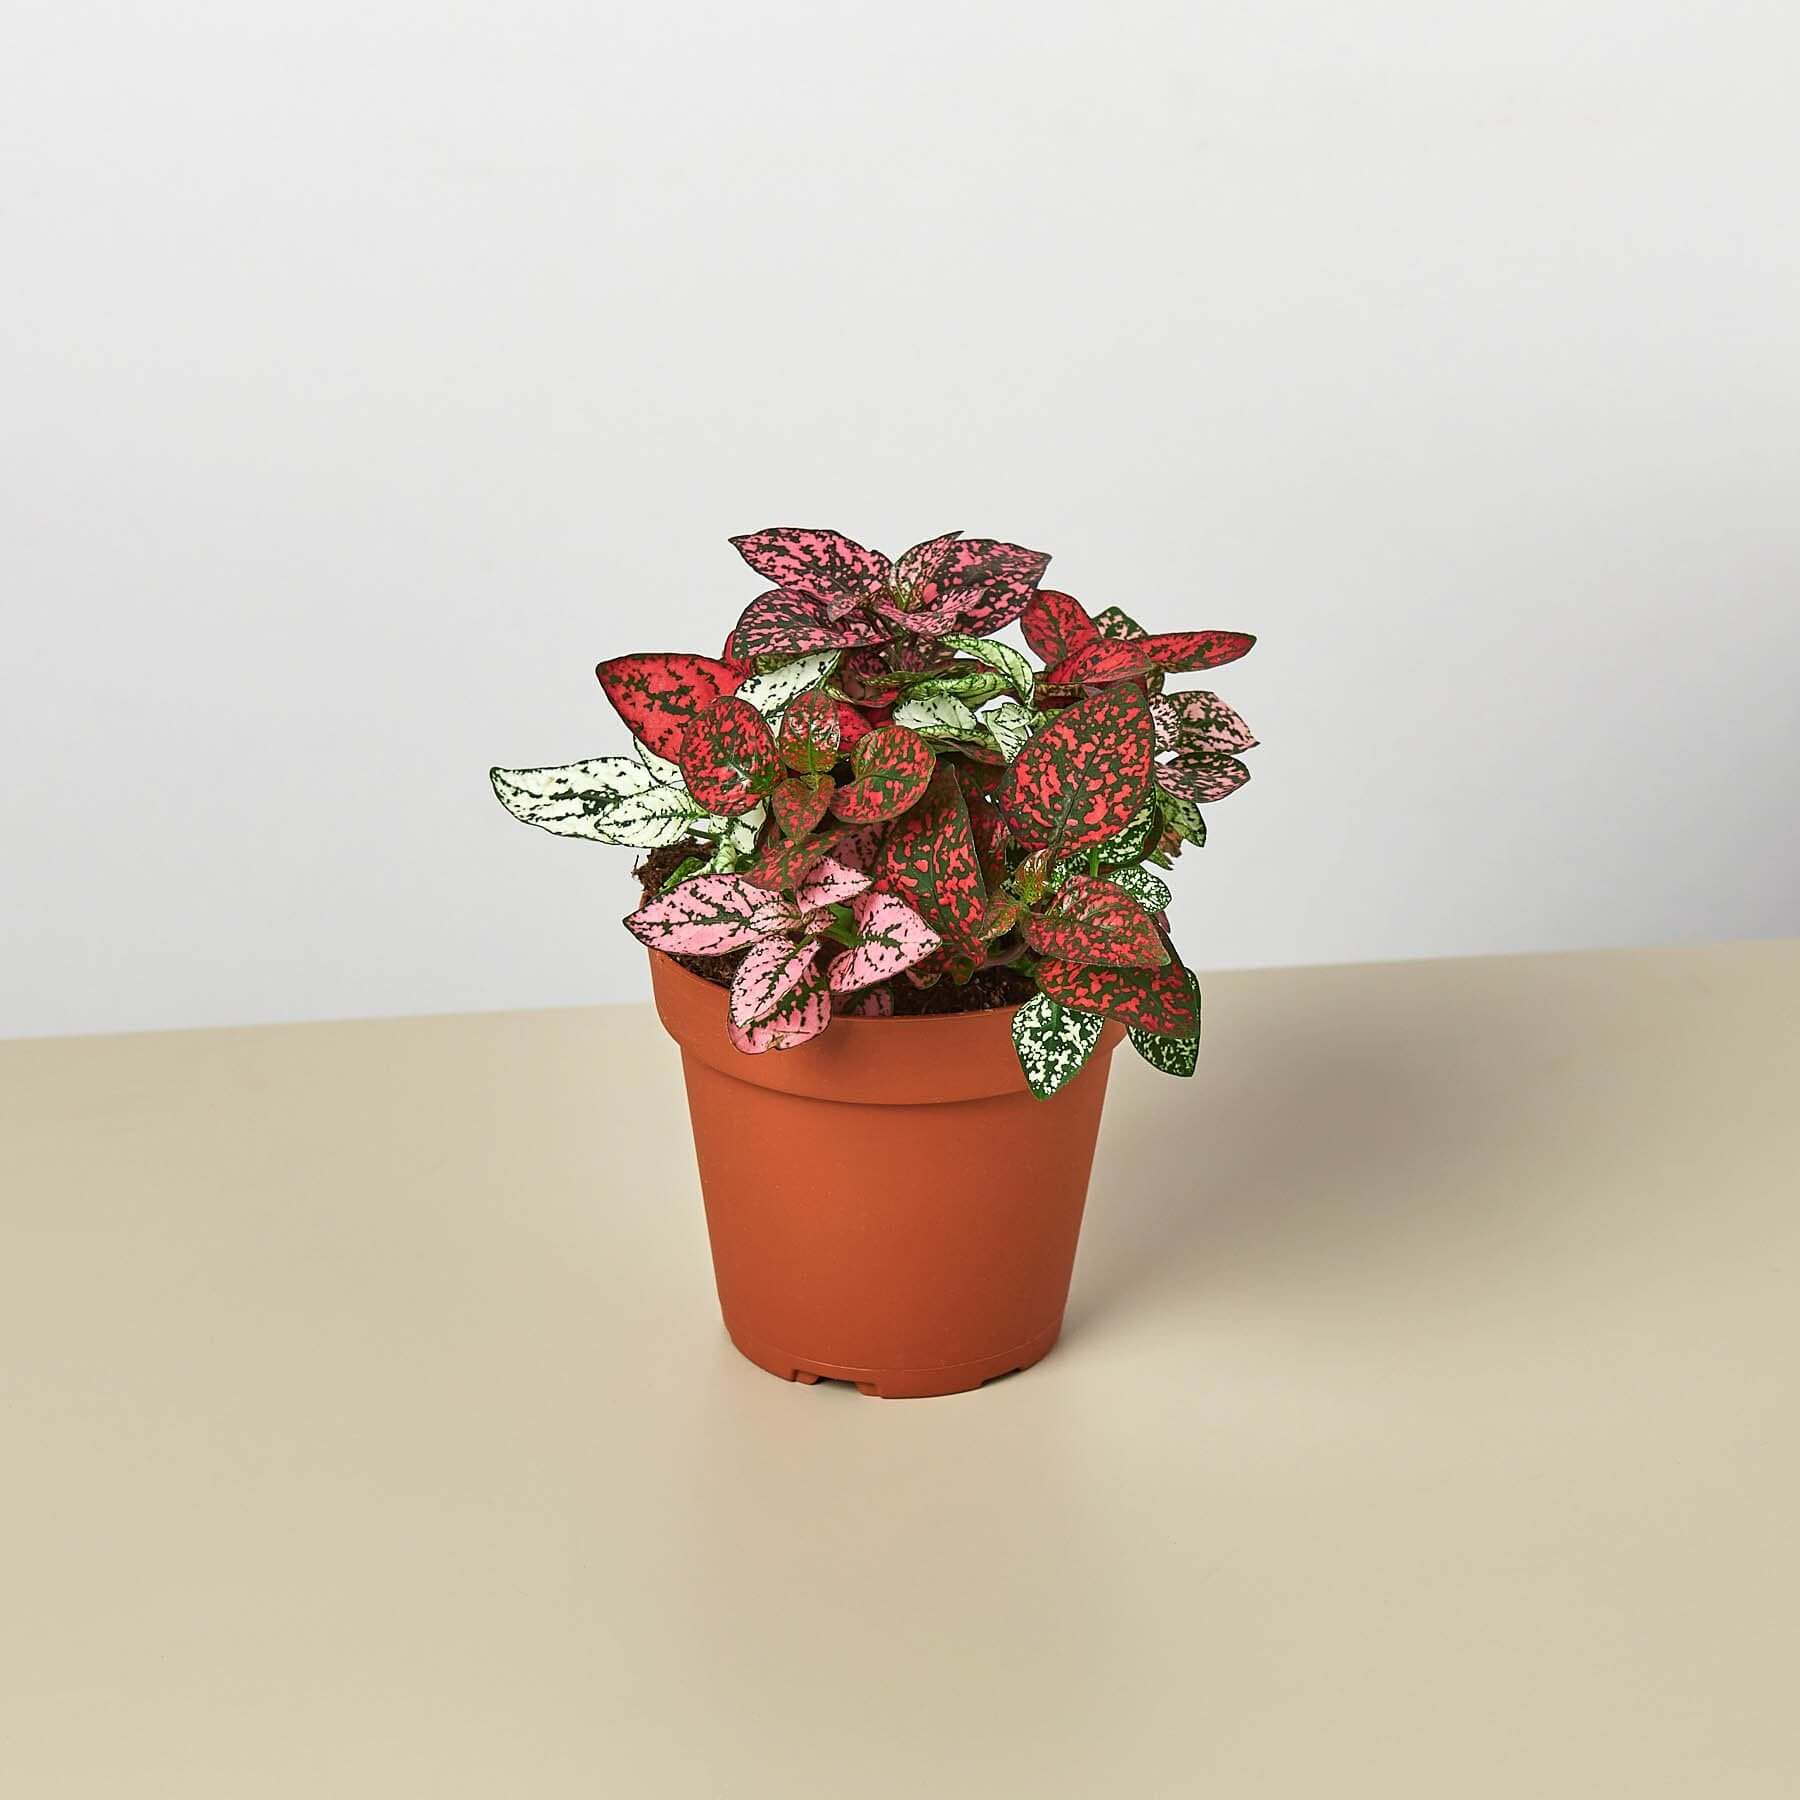 Hypoestes Multi Color - Polka Dot plant | Modern house plants that clean the air